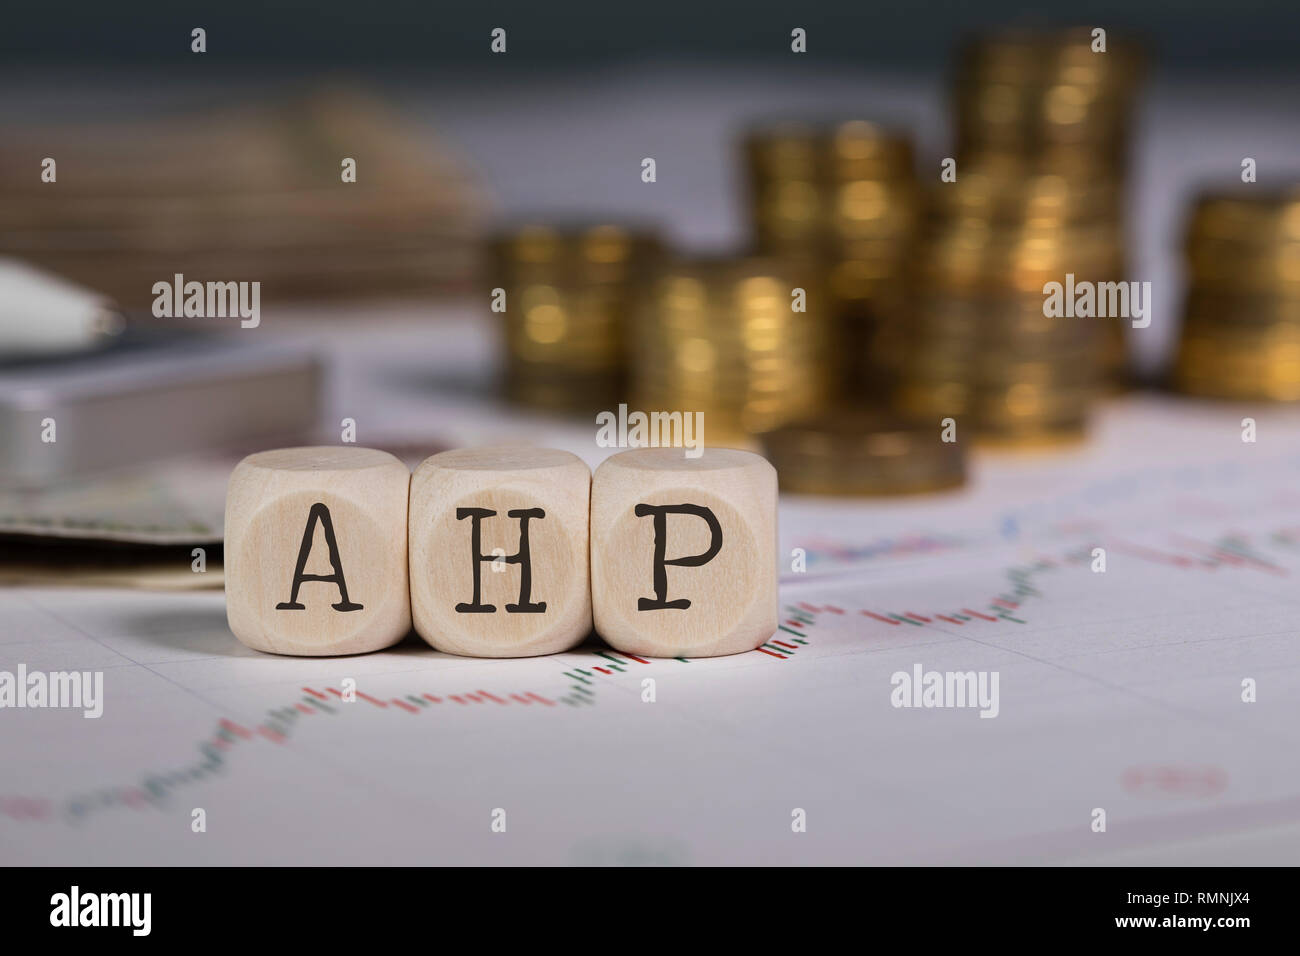 Abbreviation AHP composed of wooden letter. Stacks of coins in the background. Closeup Stock Photo